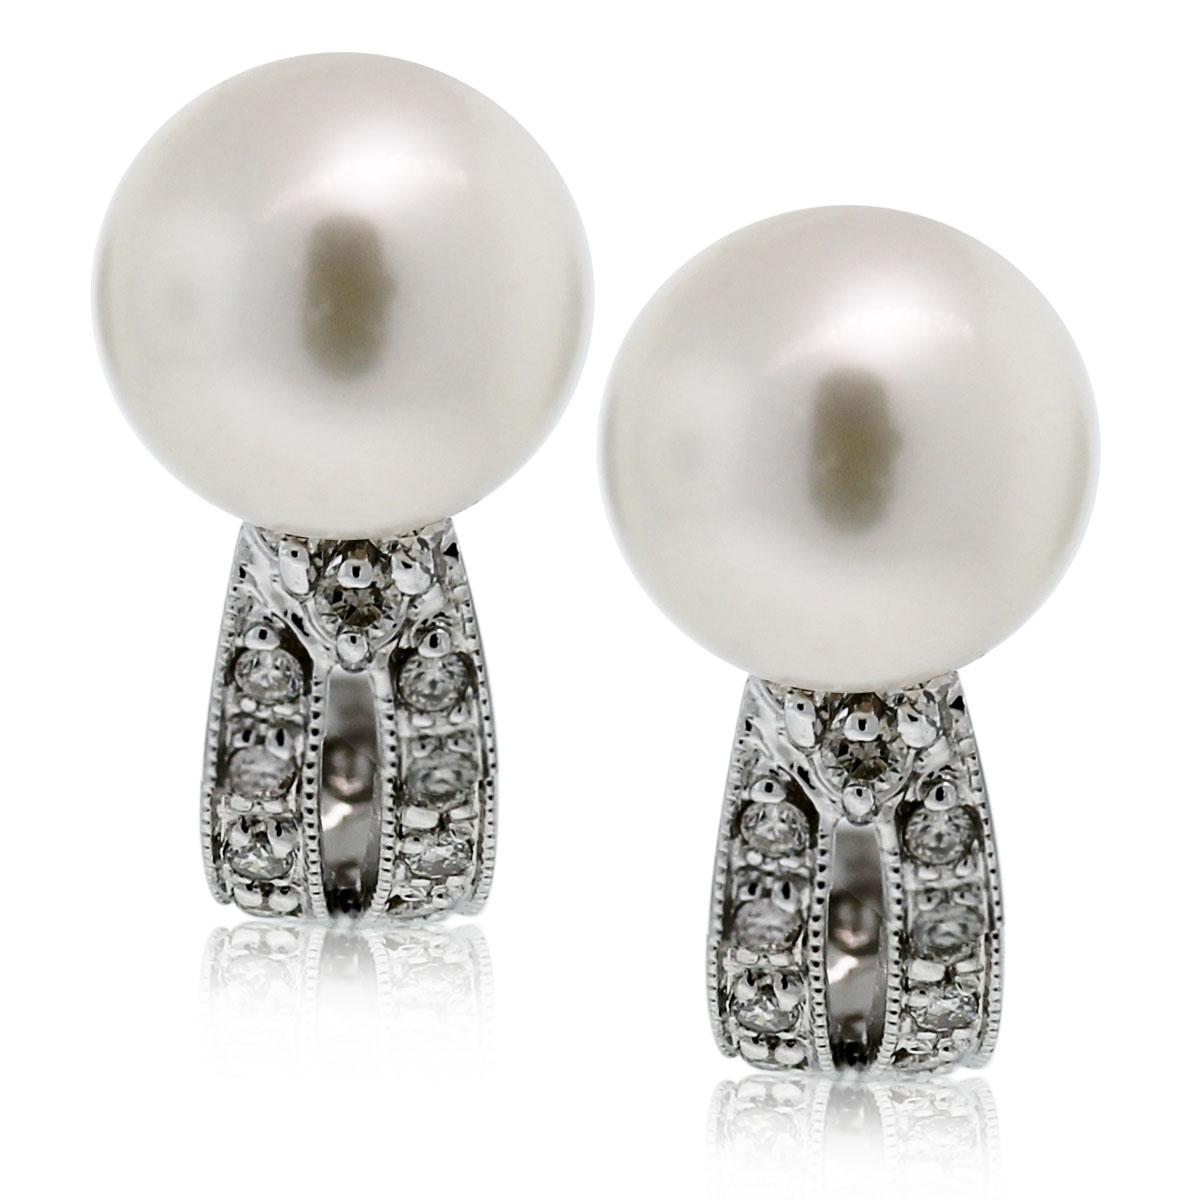 These 14k White Gold Pearl & Diamond Curved Hook Studs are beautiful